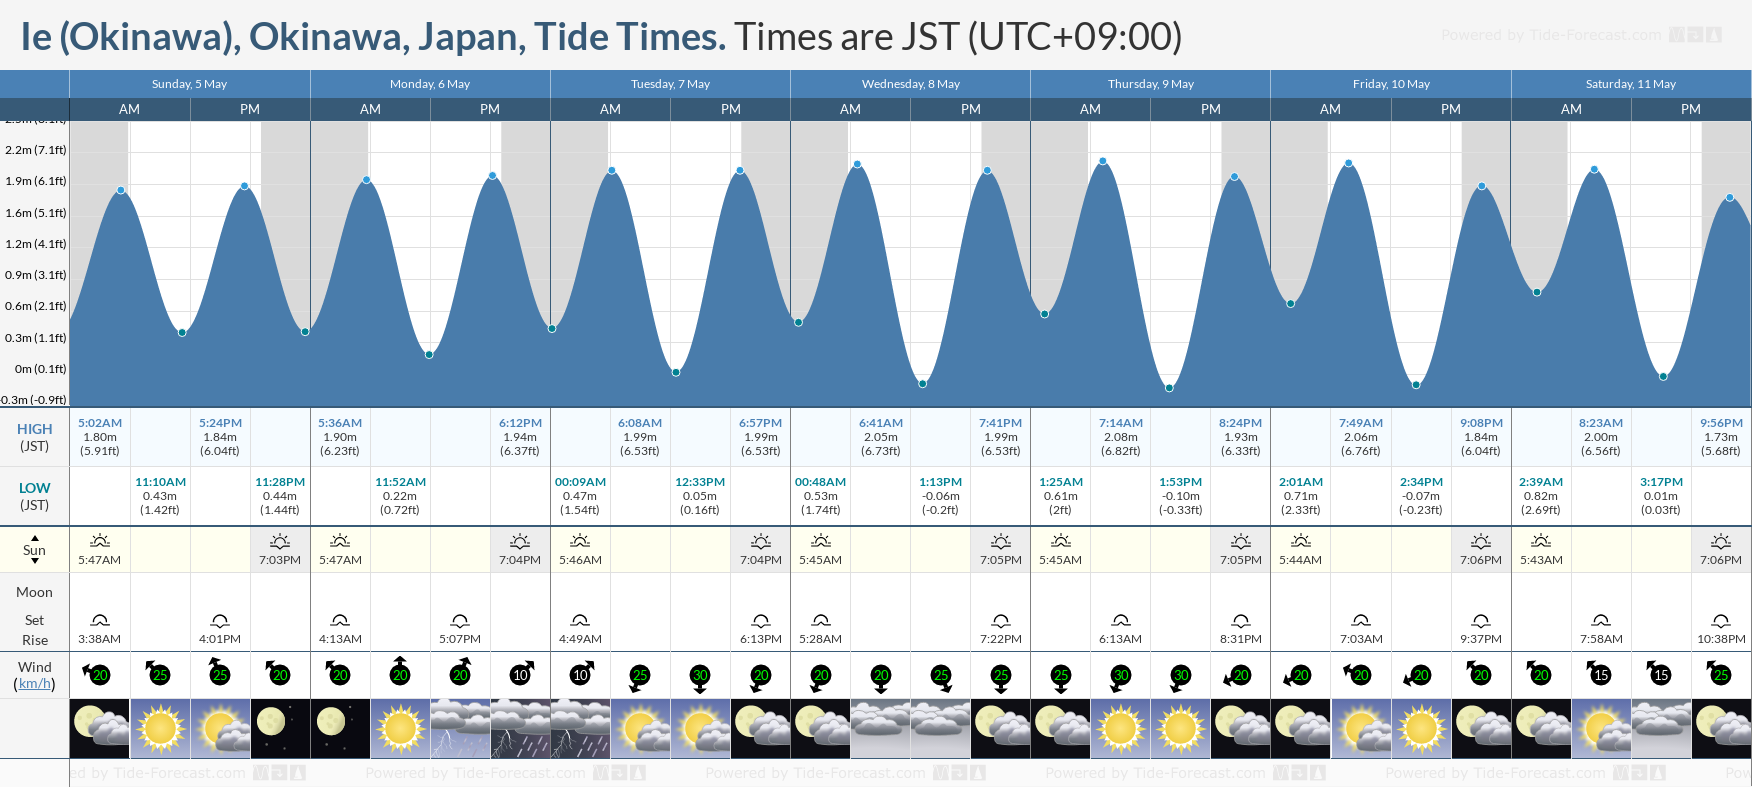 Ie (Okinawa), Okinawa, Japan Tide Chart including high and low tide times for the next 7 days